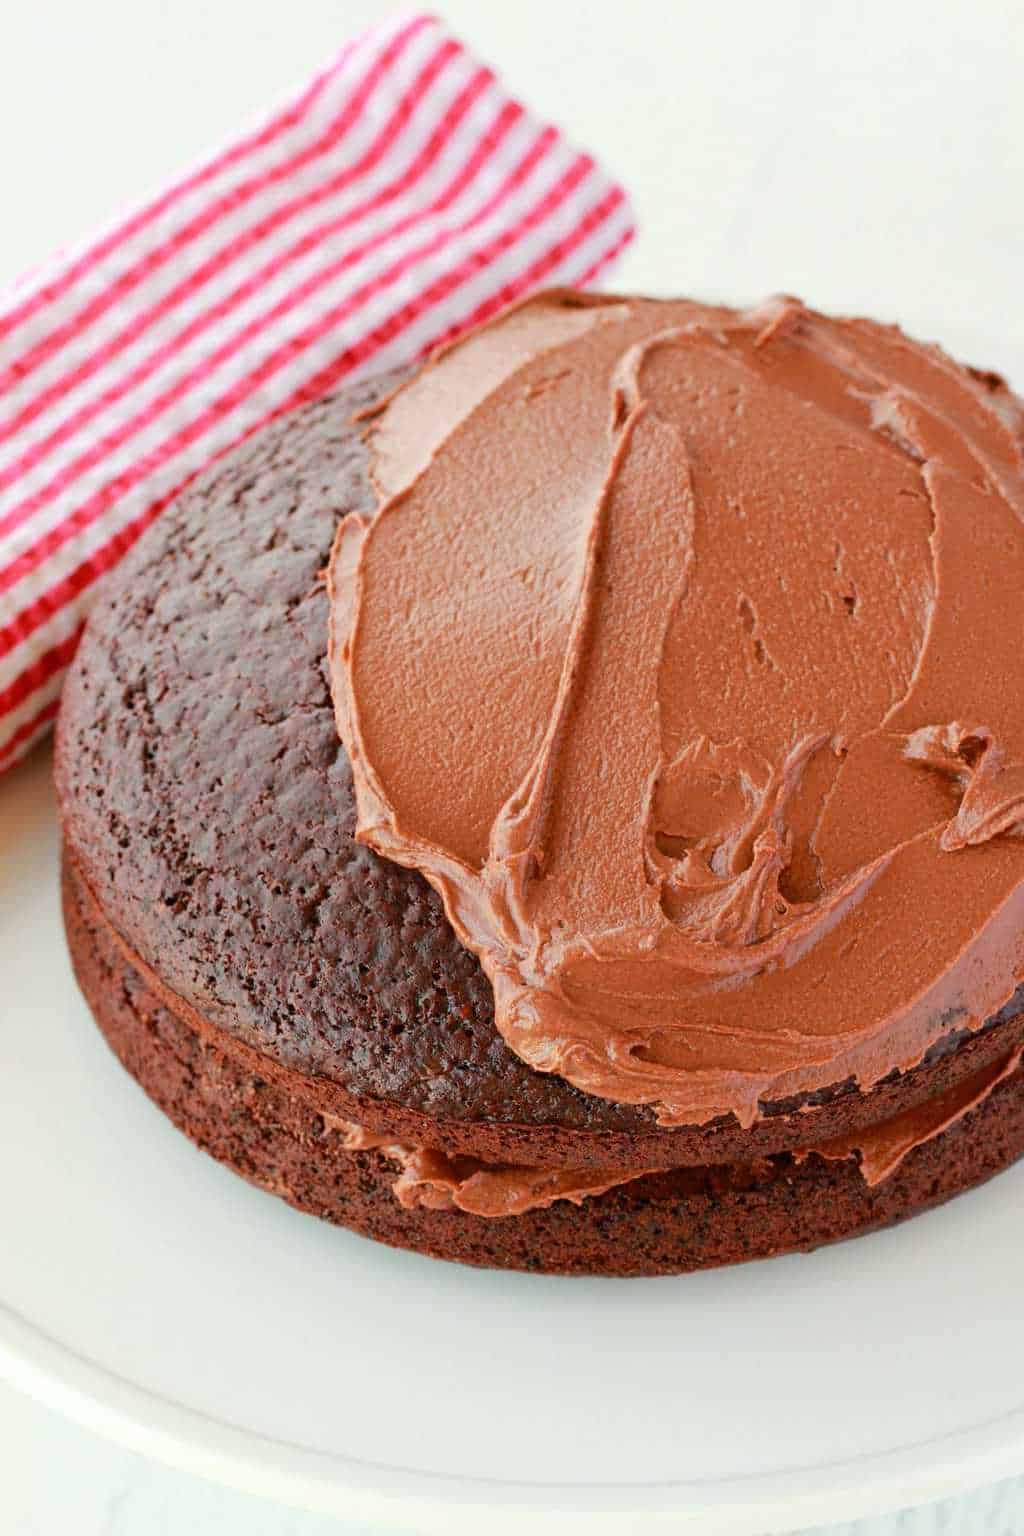 Vegan chocolate cake partially frosted with chocolate frosting.